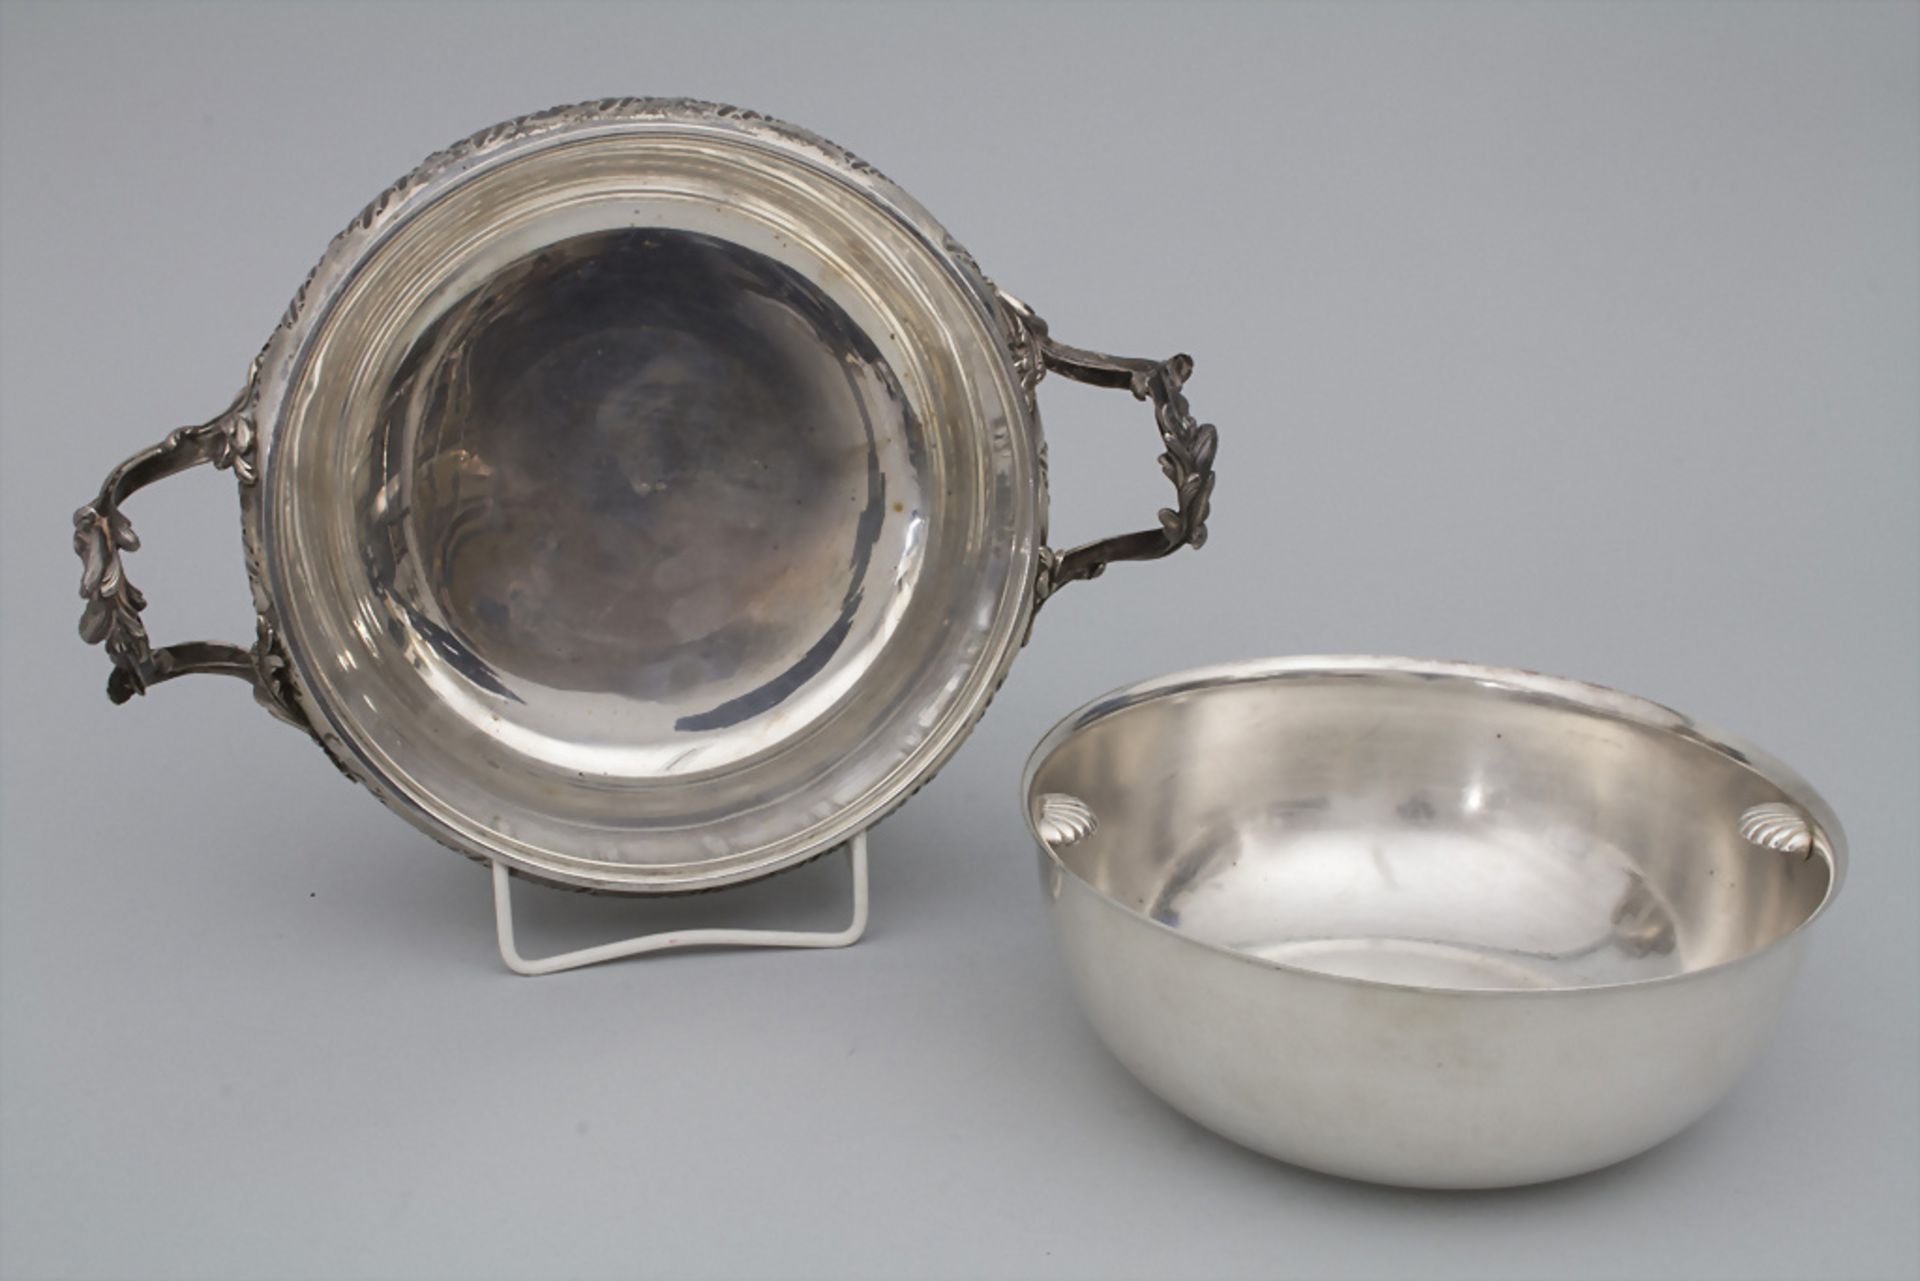 Legumier / Wöchnerinnenschüssel / A silver vegetable tureen with lining and cover, Paris, um 1900 - Image 8 of 13